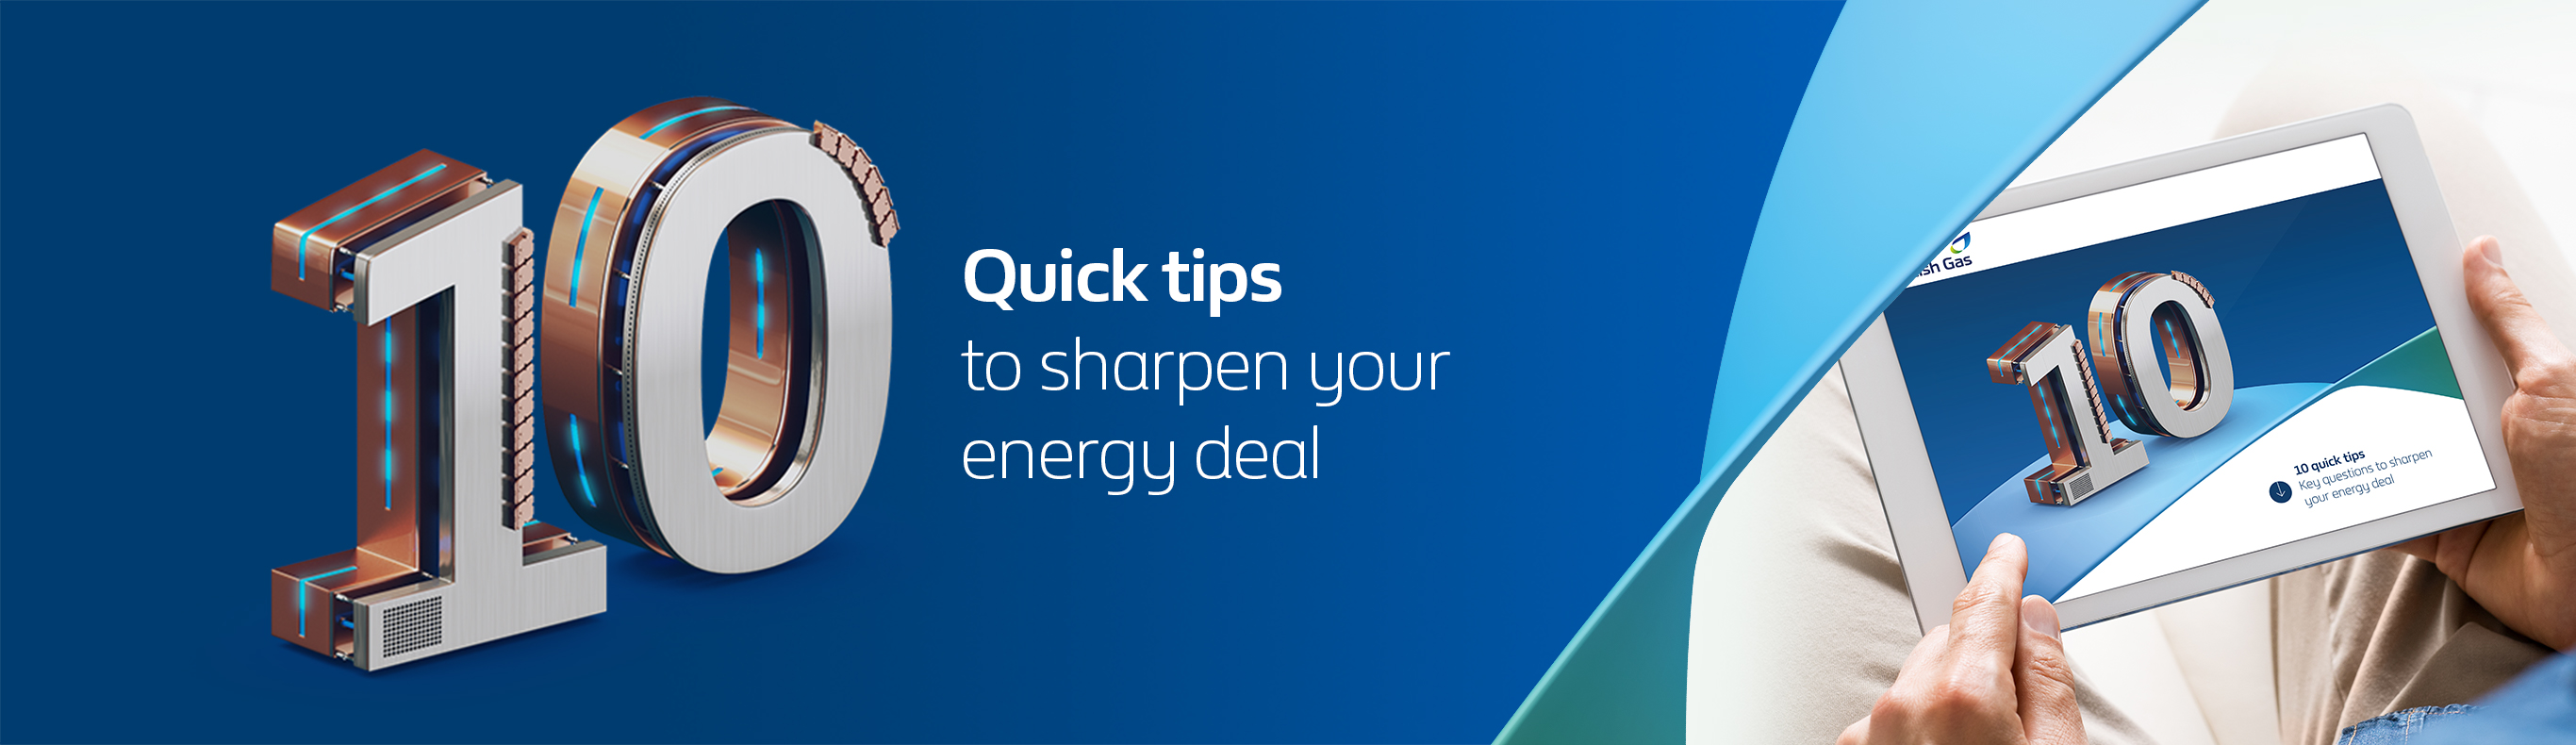 10 quick tips to sharpen your energy deal